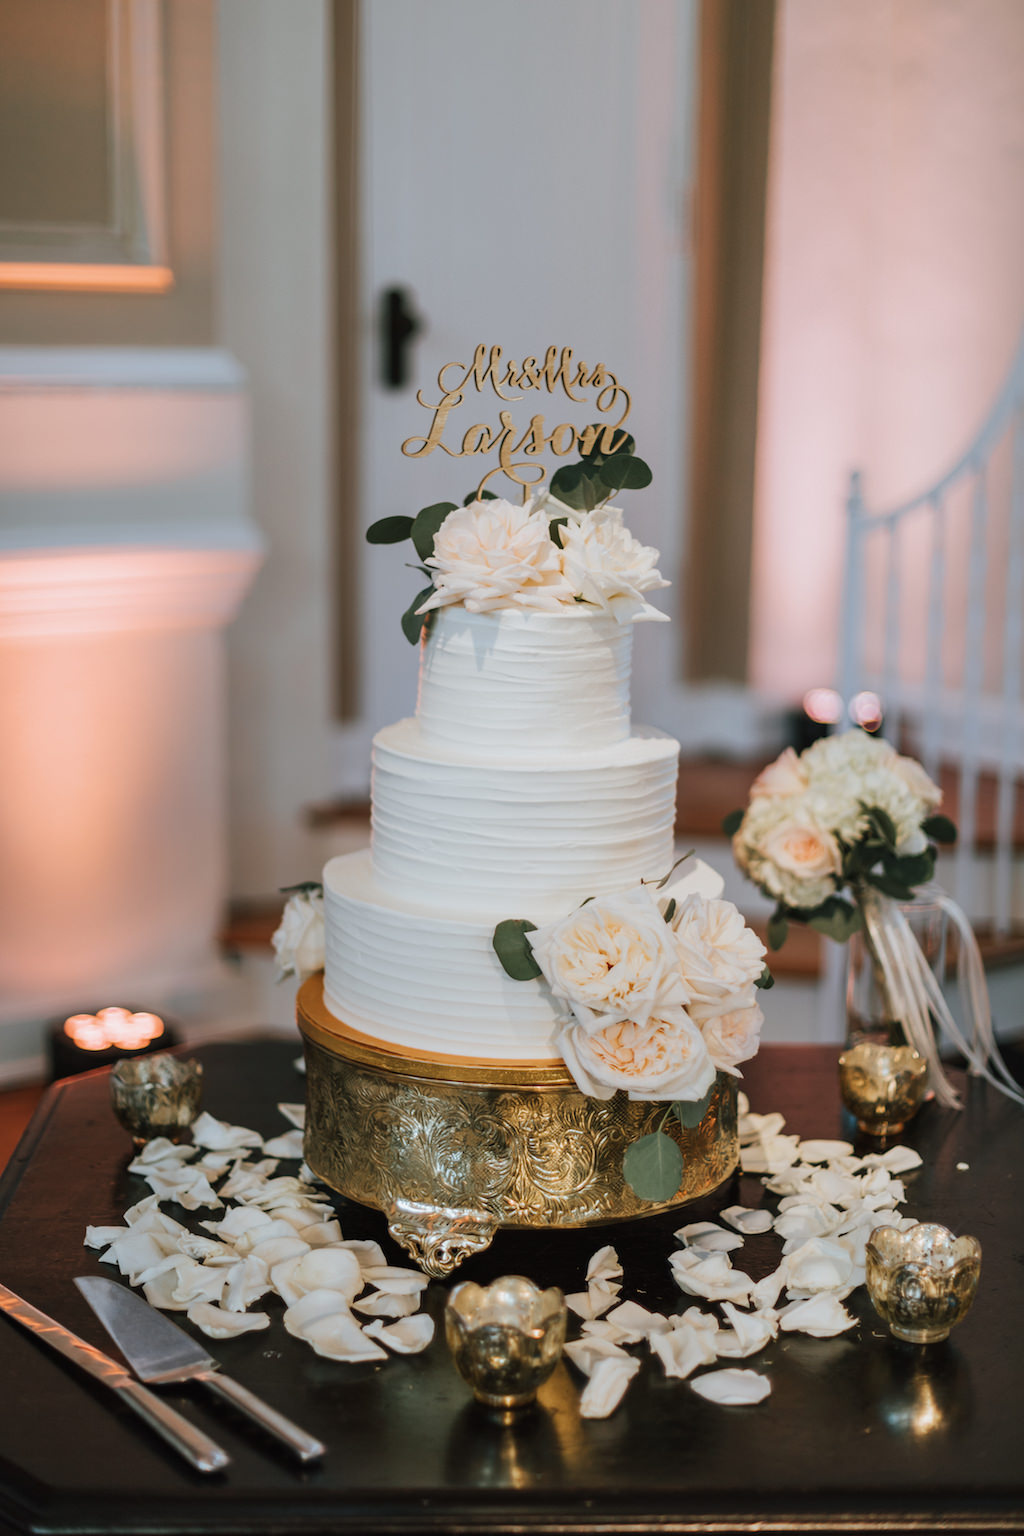 Three Tiered Round White Wedding Cake with Blush Pink Florals and Greenery, with Stylish Gold Cake Topper and Gold Cake Stand